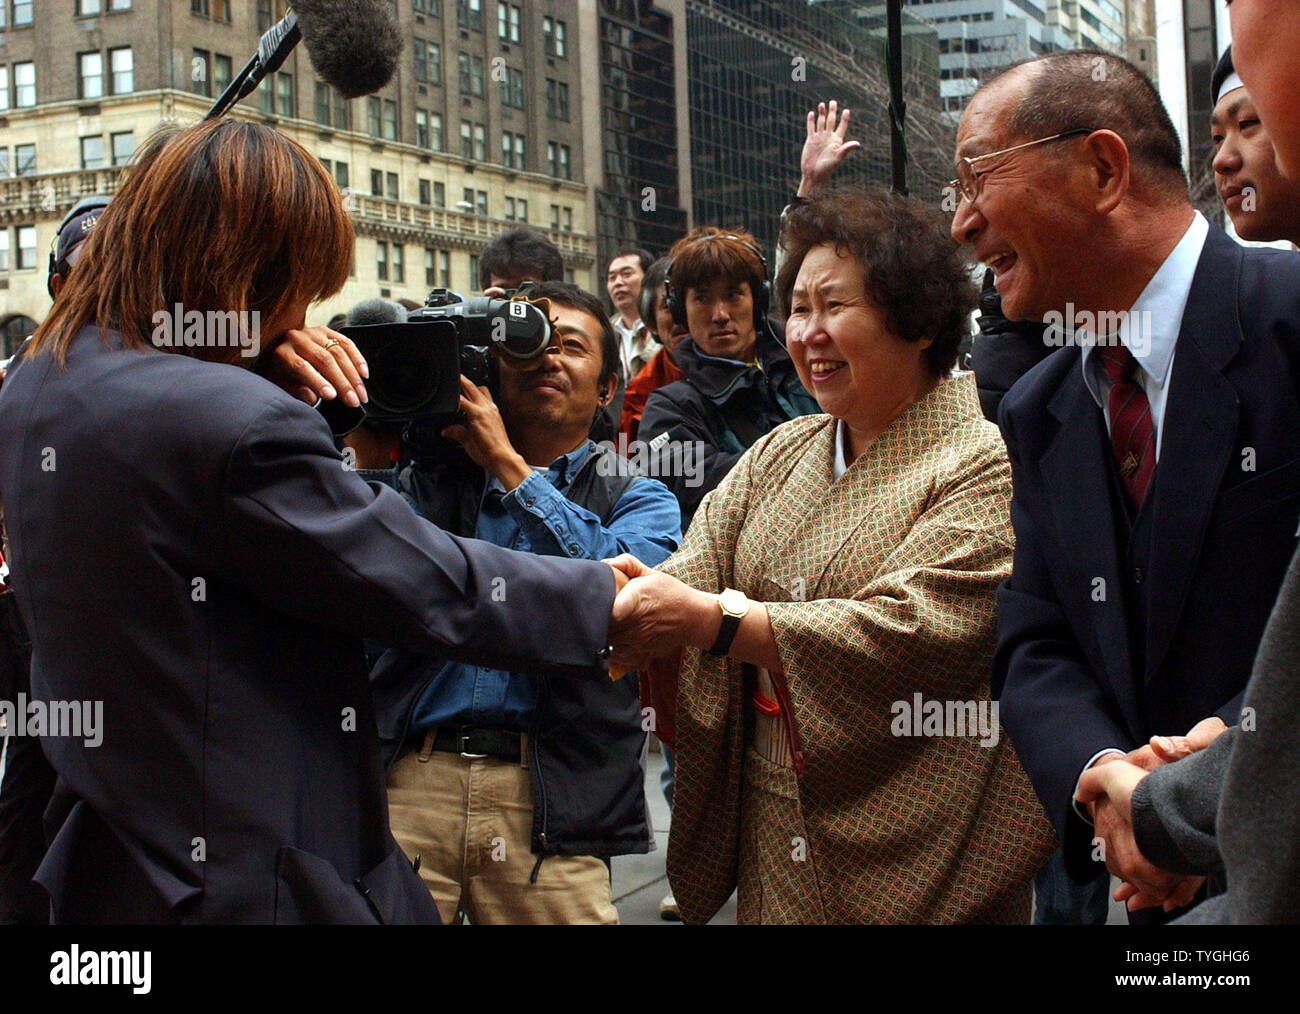 Japanese cab driver Tsyuyoshi Sakuma (right) looks on while his wife Kayuko greets her daughter and co-driver Ayako Sakuma (left)  outside the Plaza Hotel in New York City on April 2, 2004 after father and daughter completed their drive from Ushuaia, Argentina on Dec. 23, 2003 to the United States.  (UPI/Ezio Petersen) Stock Photo